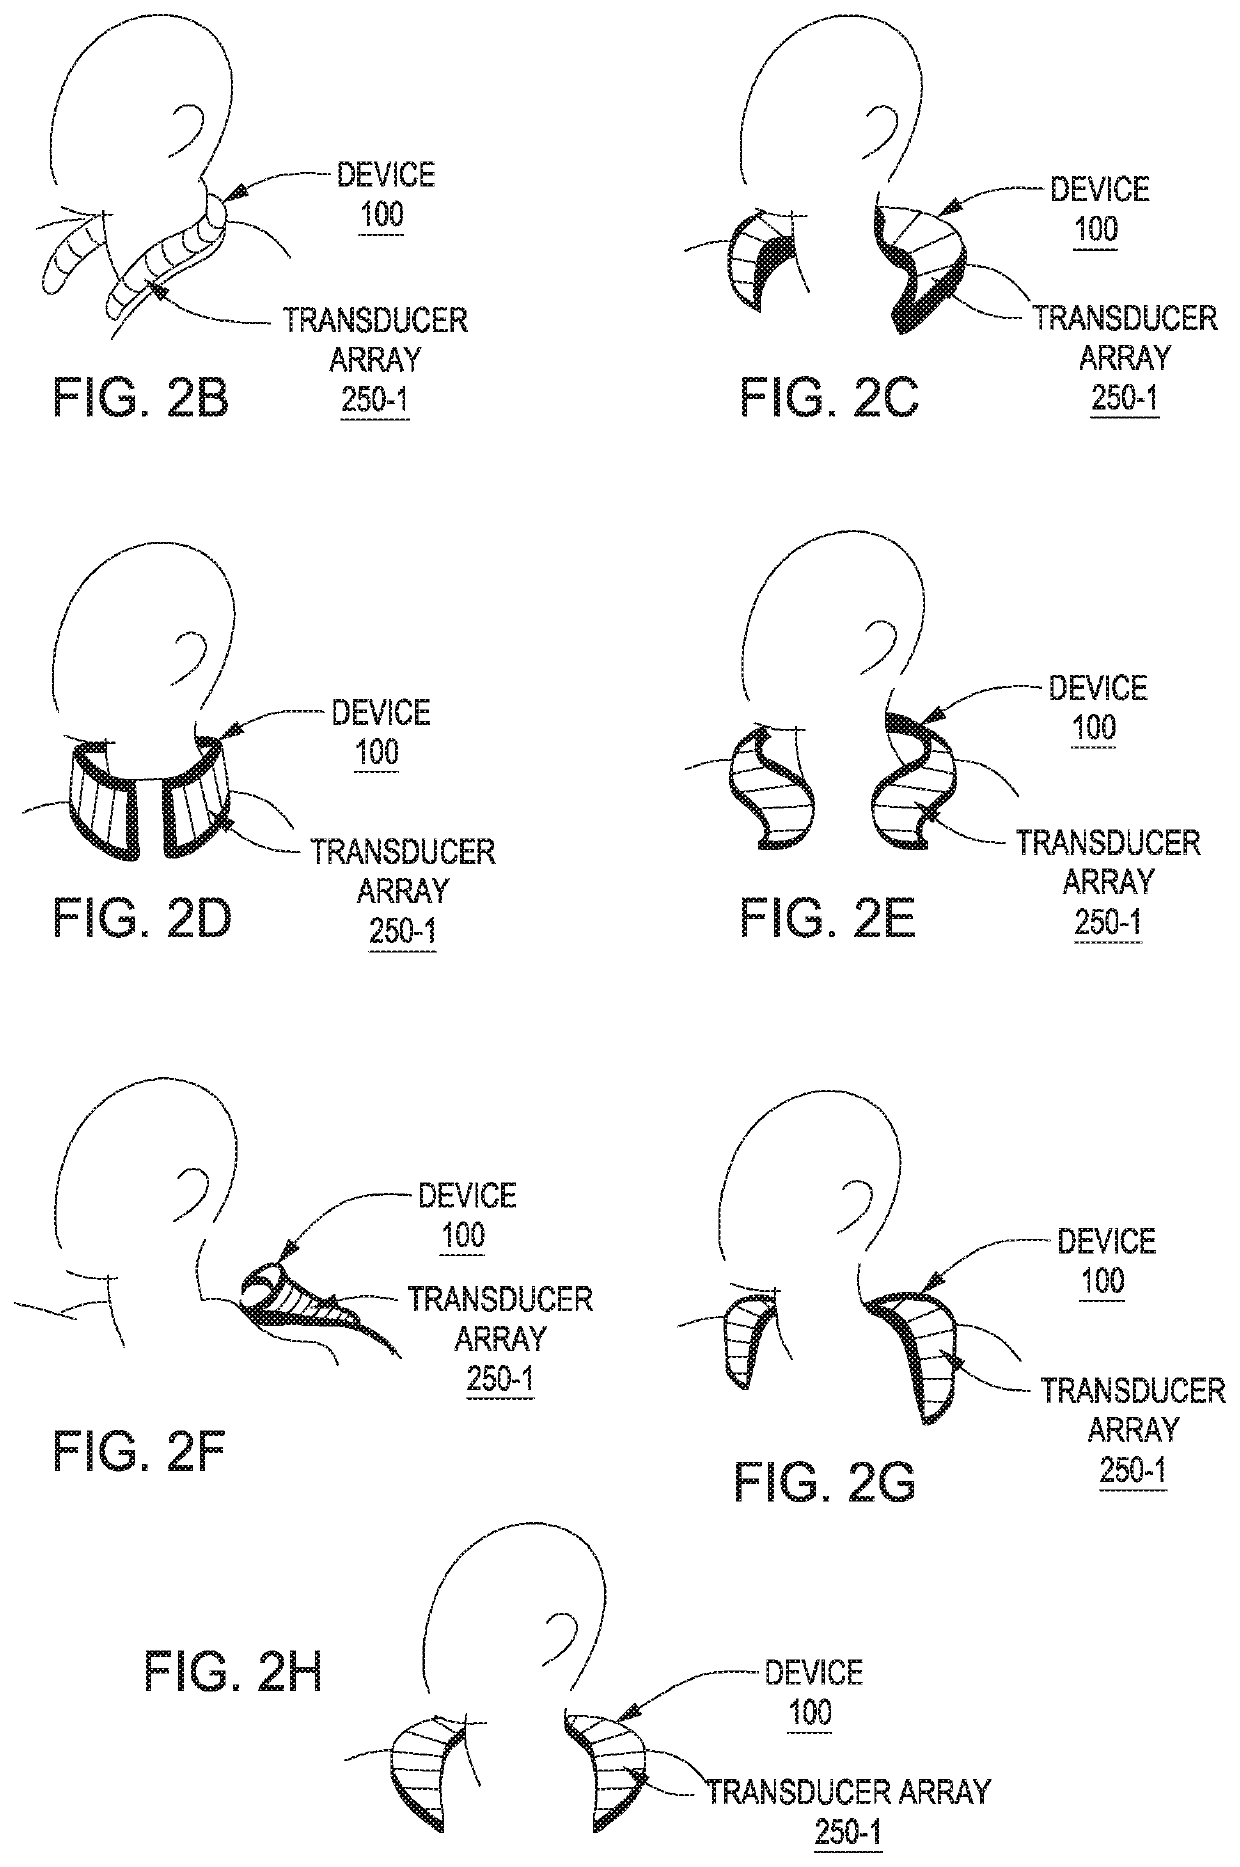 Haptics device for producing directional sound and haptic sensations